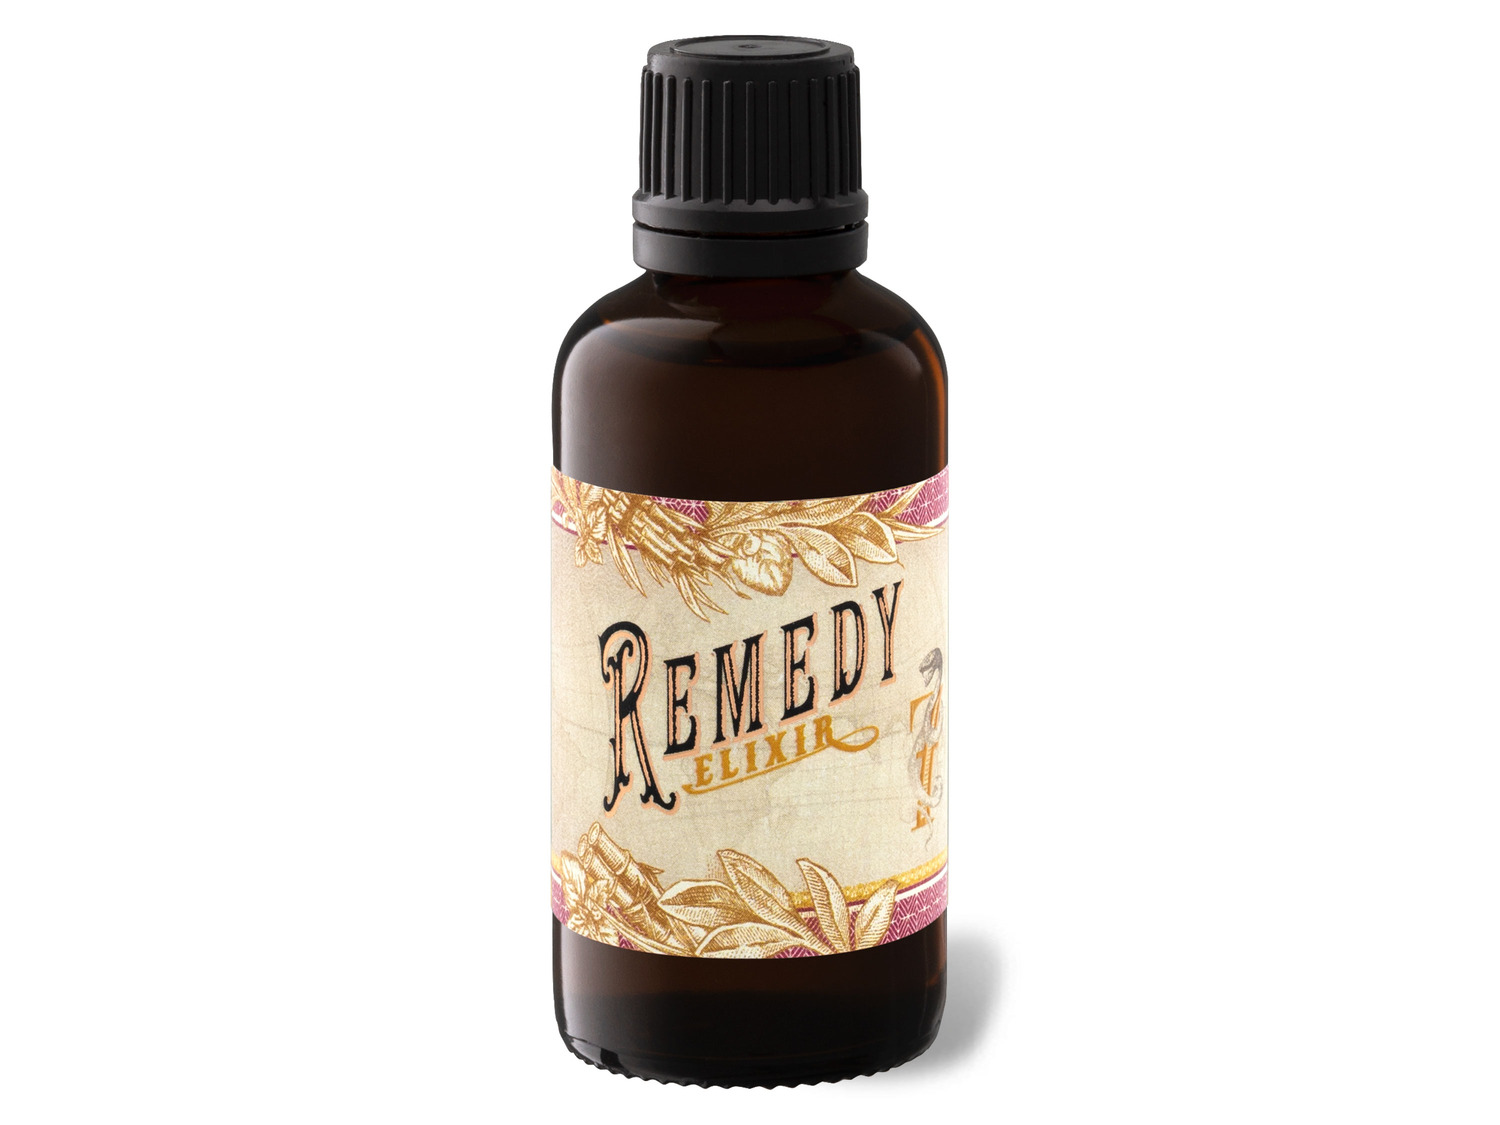 Remedy Spiced Rum 41,5% Vol + 40%… Remedy Pineapple 5cl